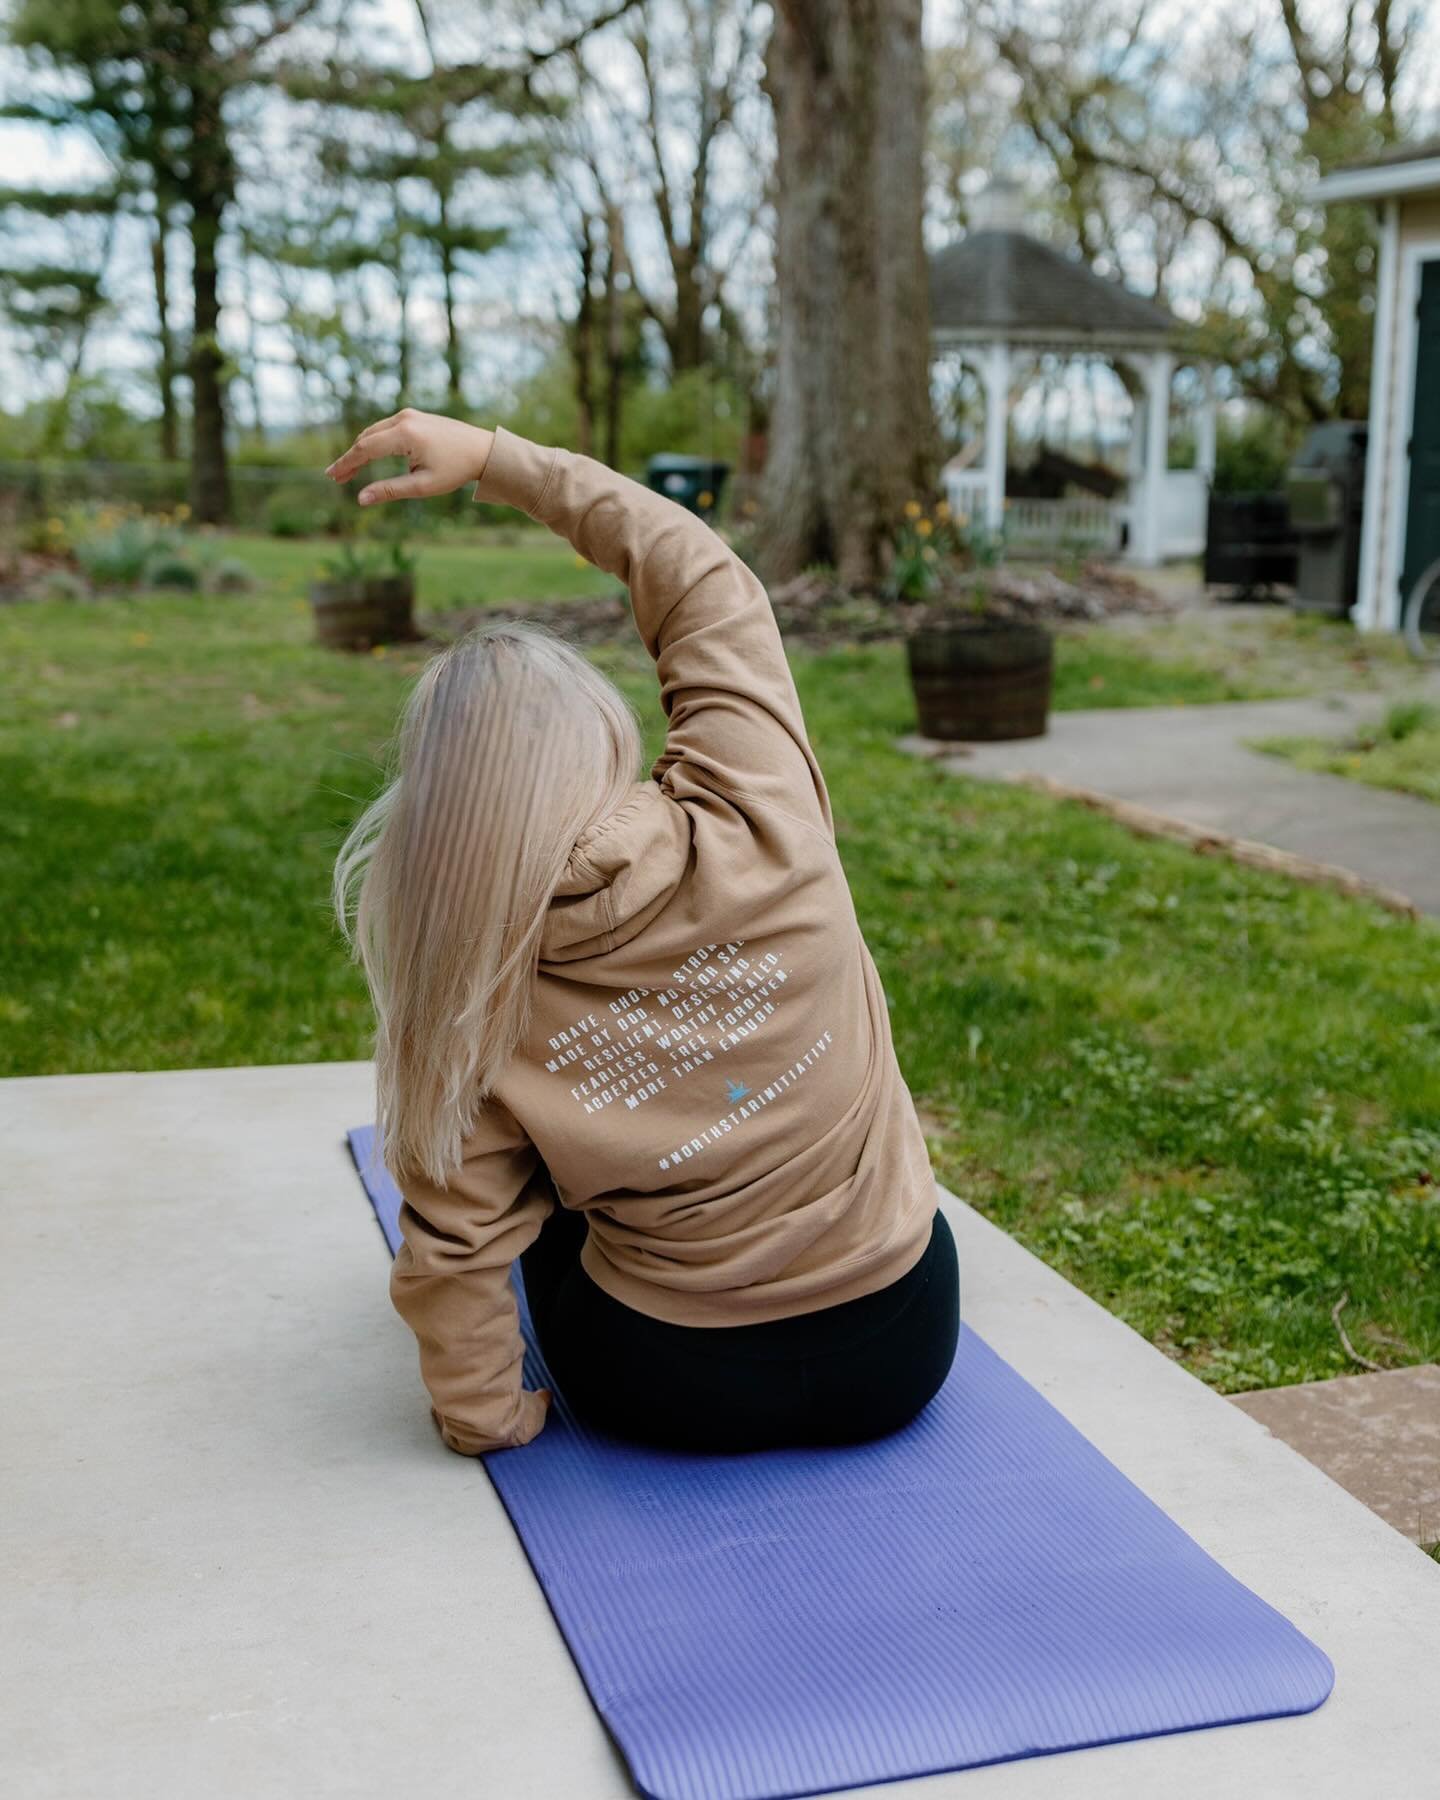 Did you know, conscious breathing and breathwork can help process and release the experiences of trauma? 

On Wednesdays, staff and harbor residents are joined by volunteer a certified yoga instructor leading an optional on site class to improve stre